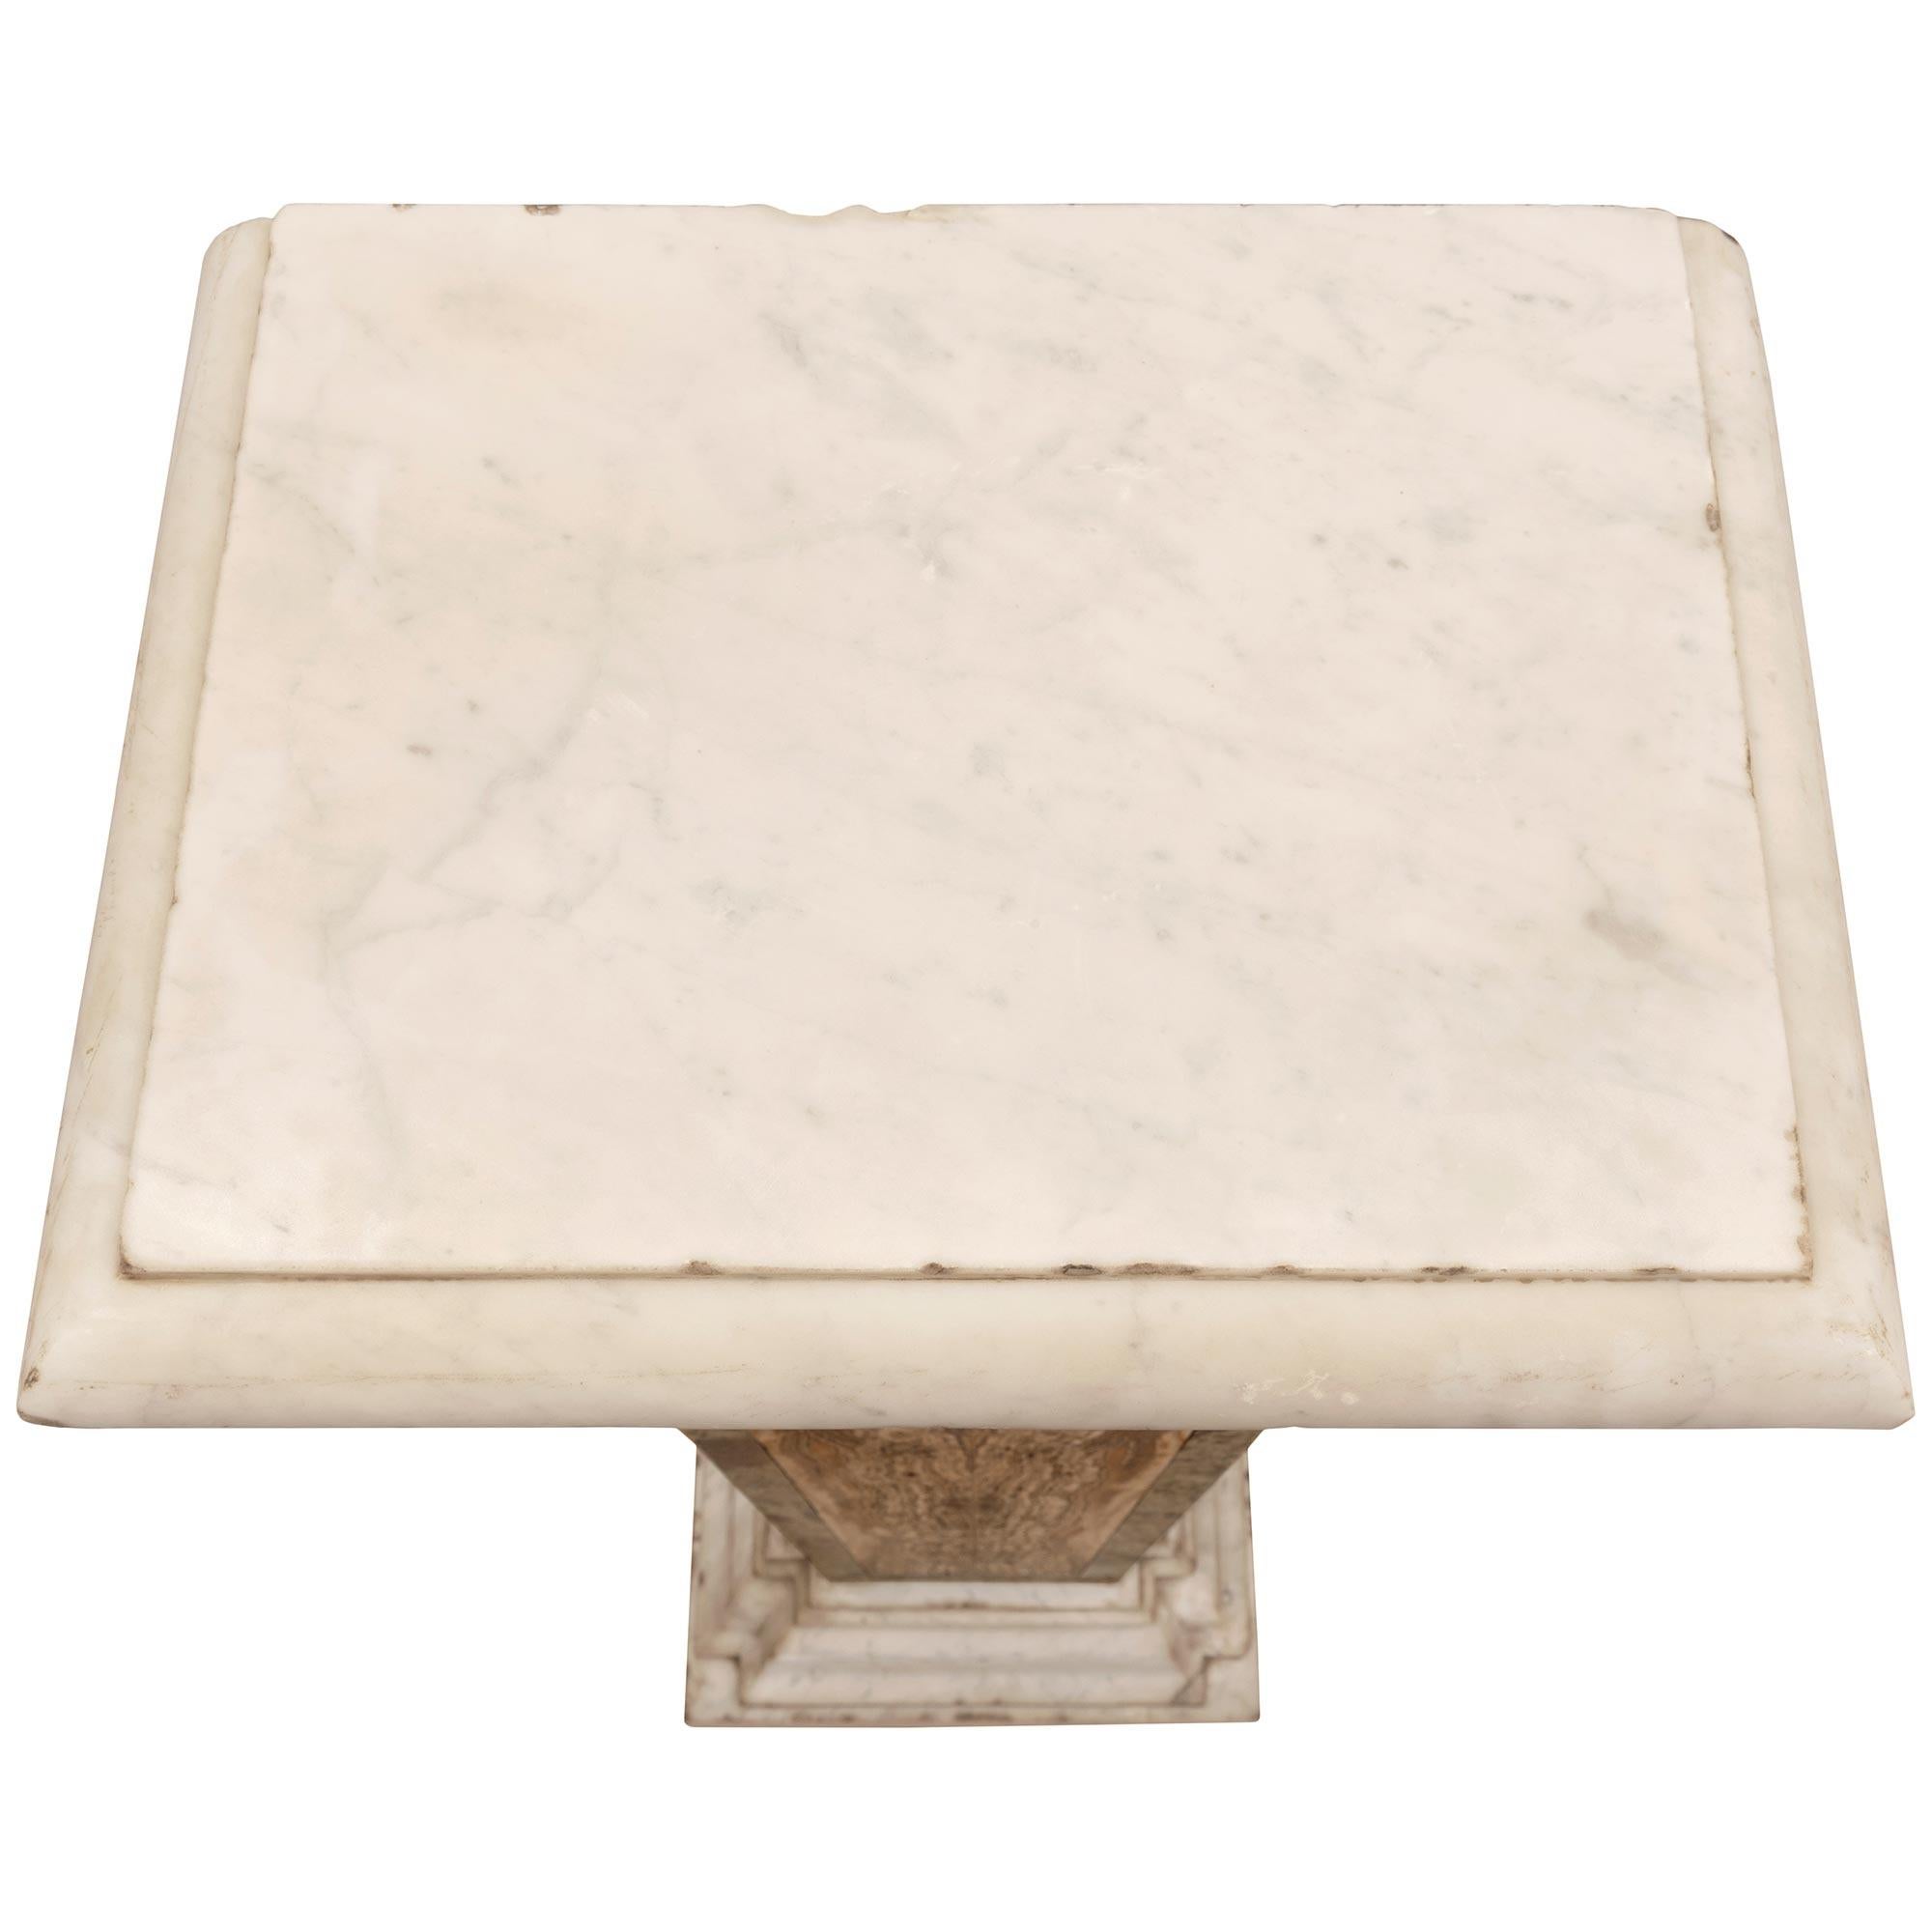 A stunning and most impressive pair of Italian 19th century Neo-Classical st. Alabastro Fiorito, Verde Antico and white Carrara marble pedestal columns. Each pedestal is raised by an elegant white Carrara marble base with fine mottled and stepped